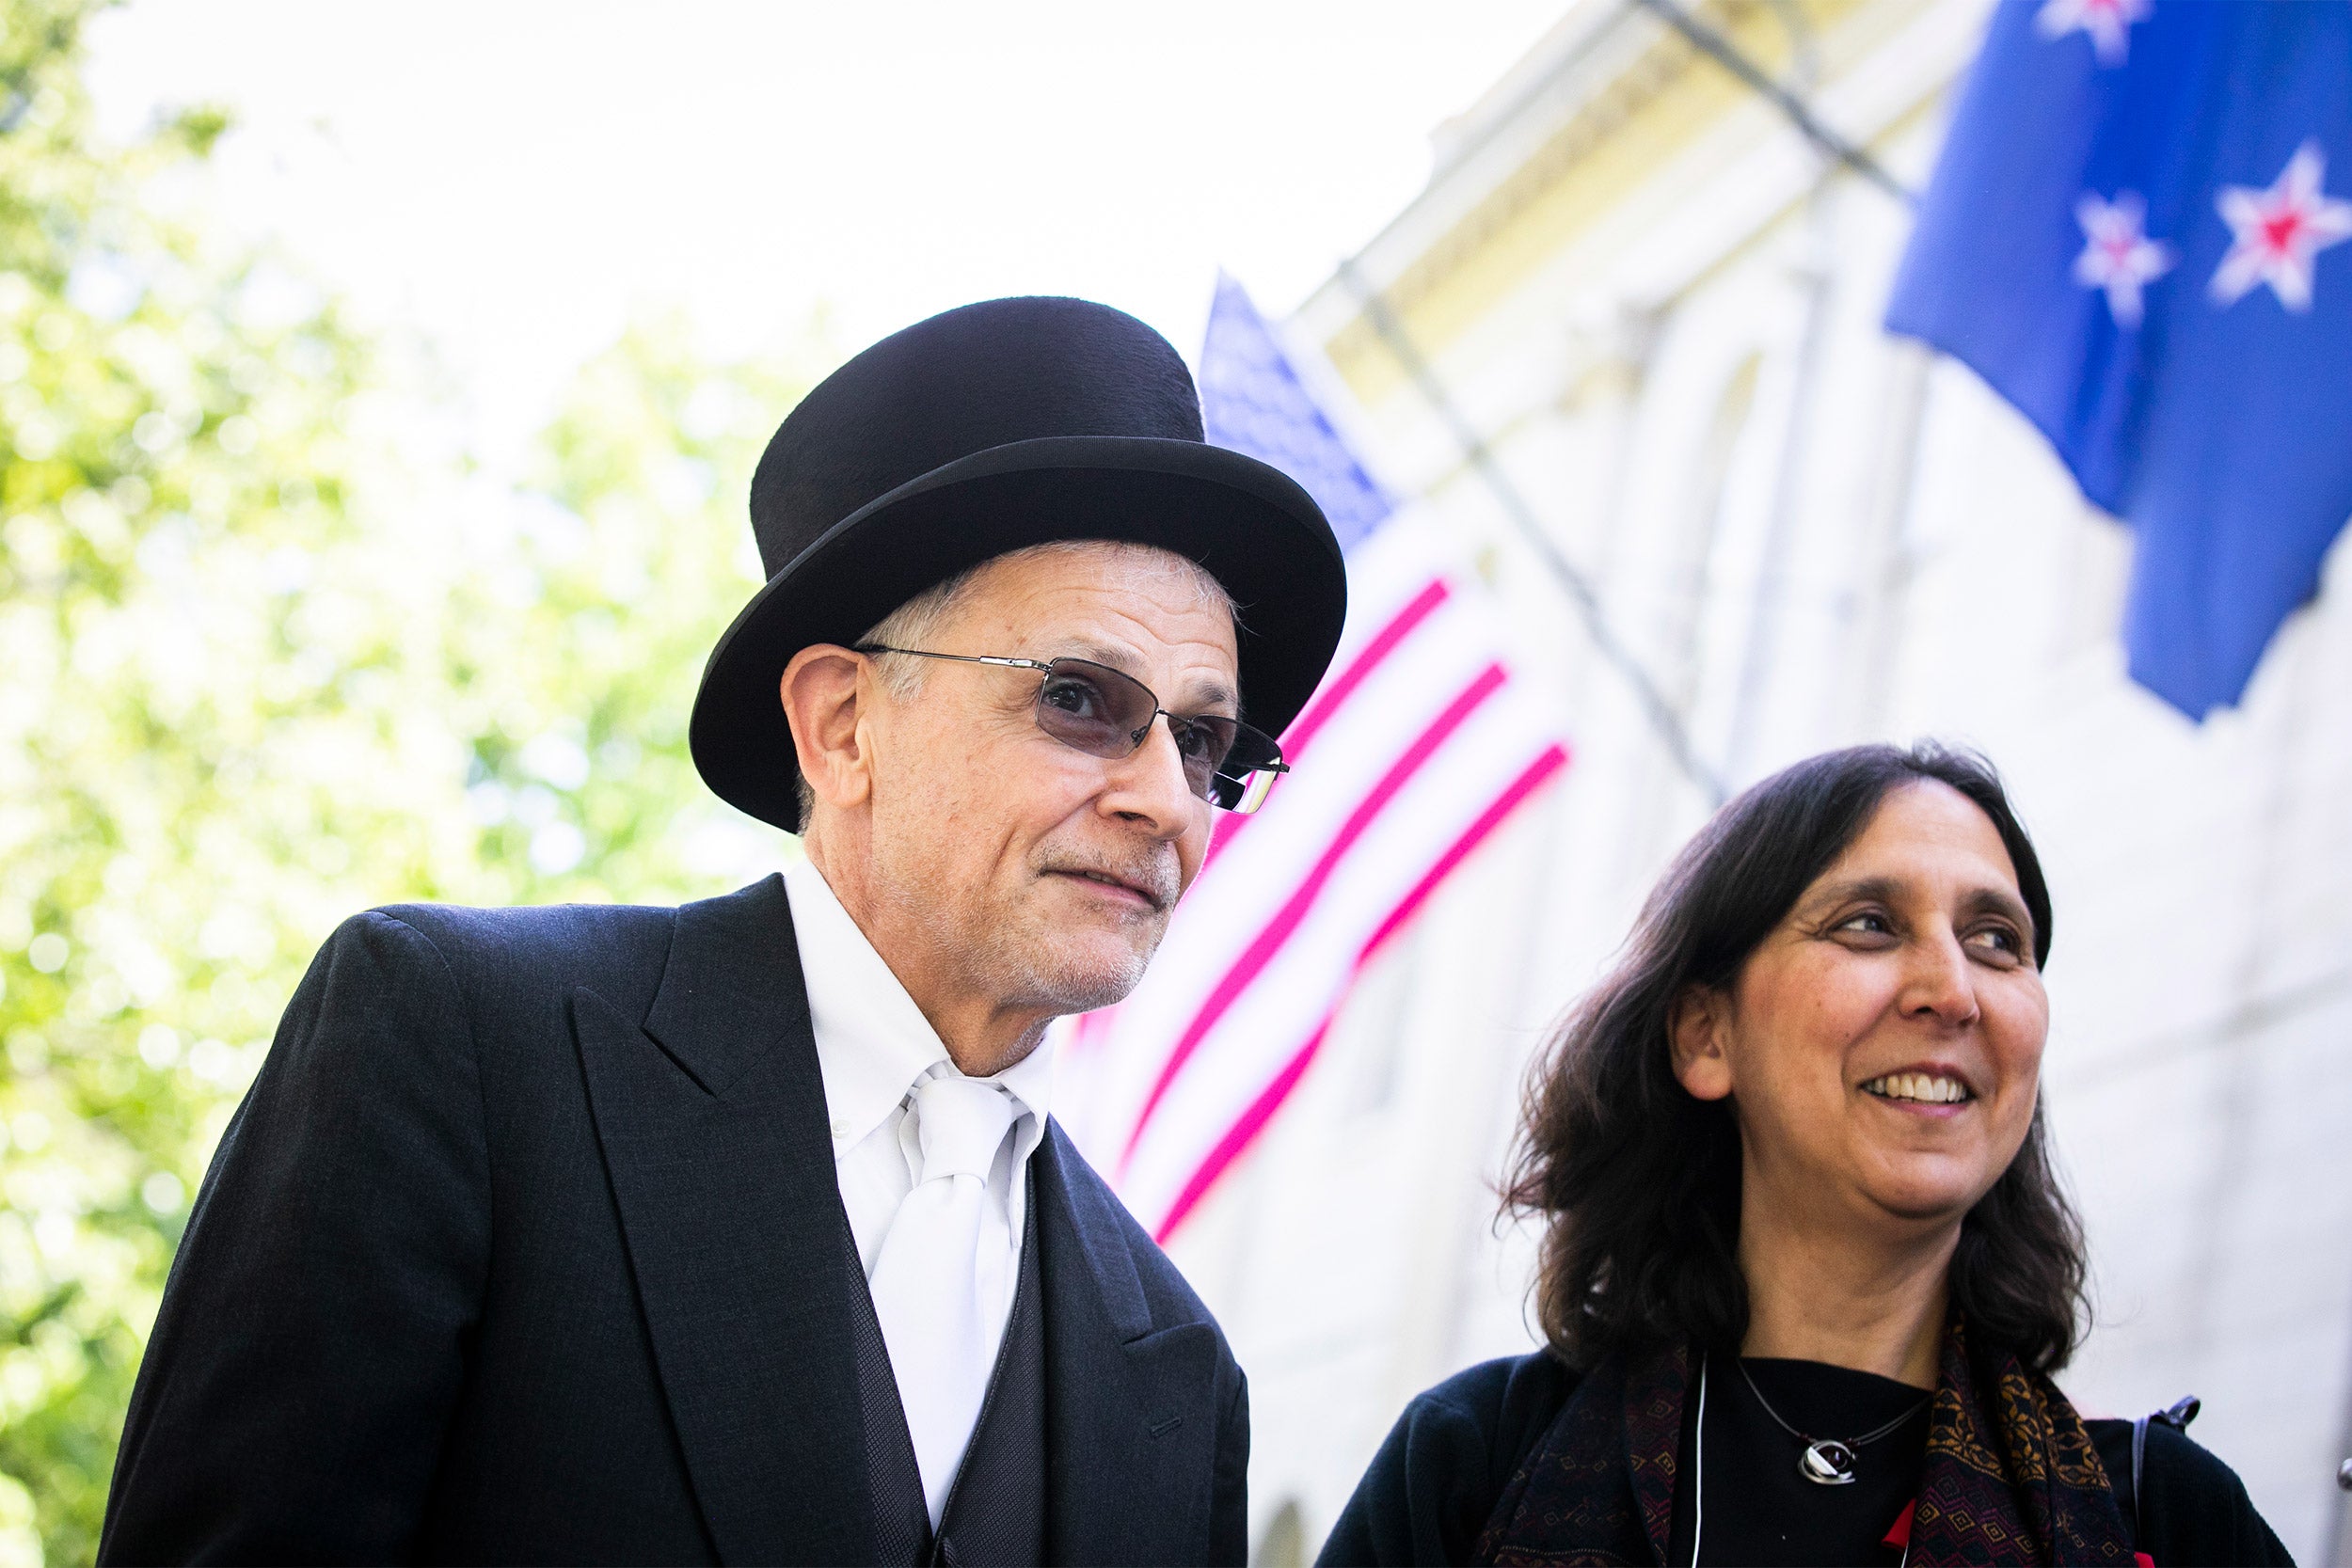 Jim Courtemanche AB '82, SM '86 (left) and Kamala Soparkar AB '87 are pictured during the ceremony.